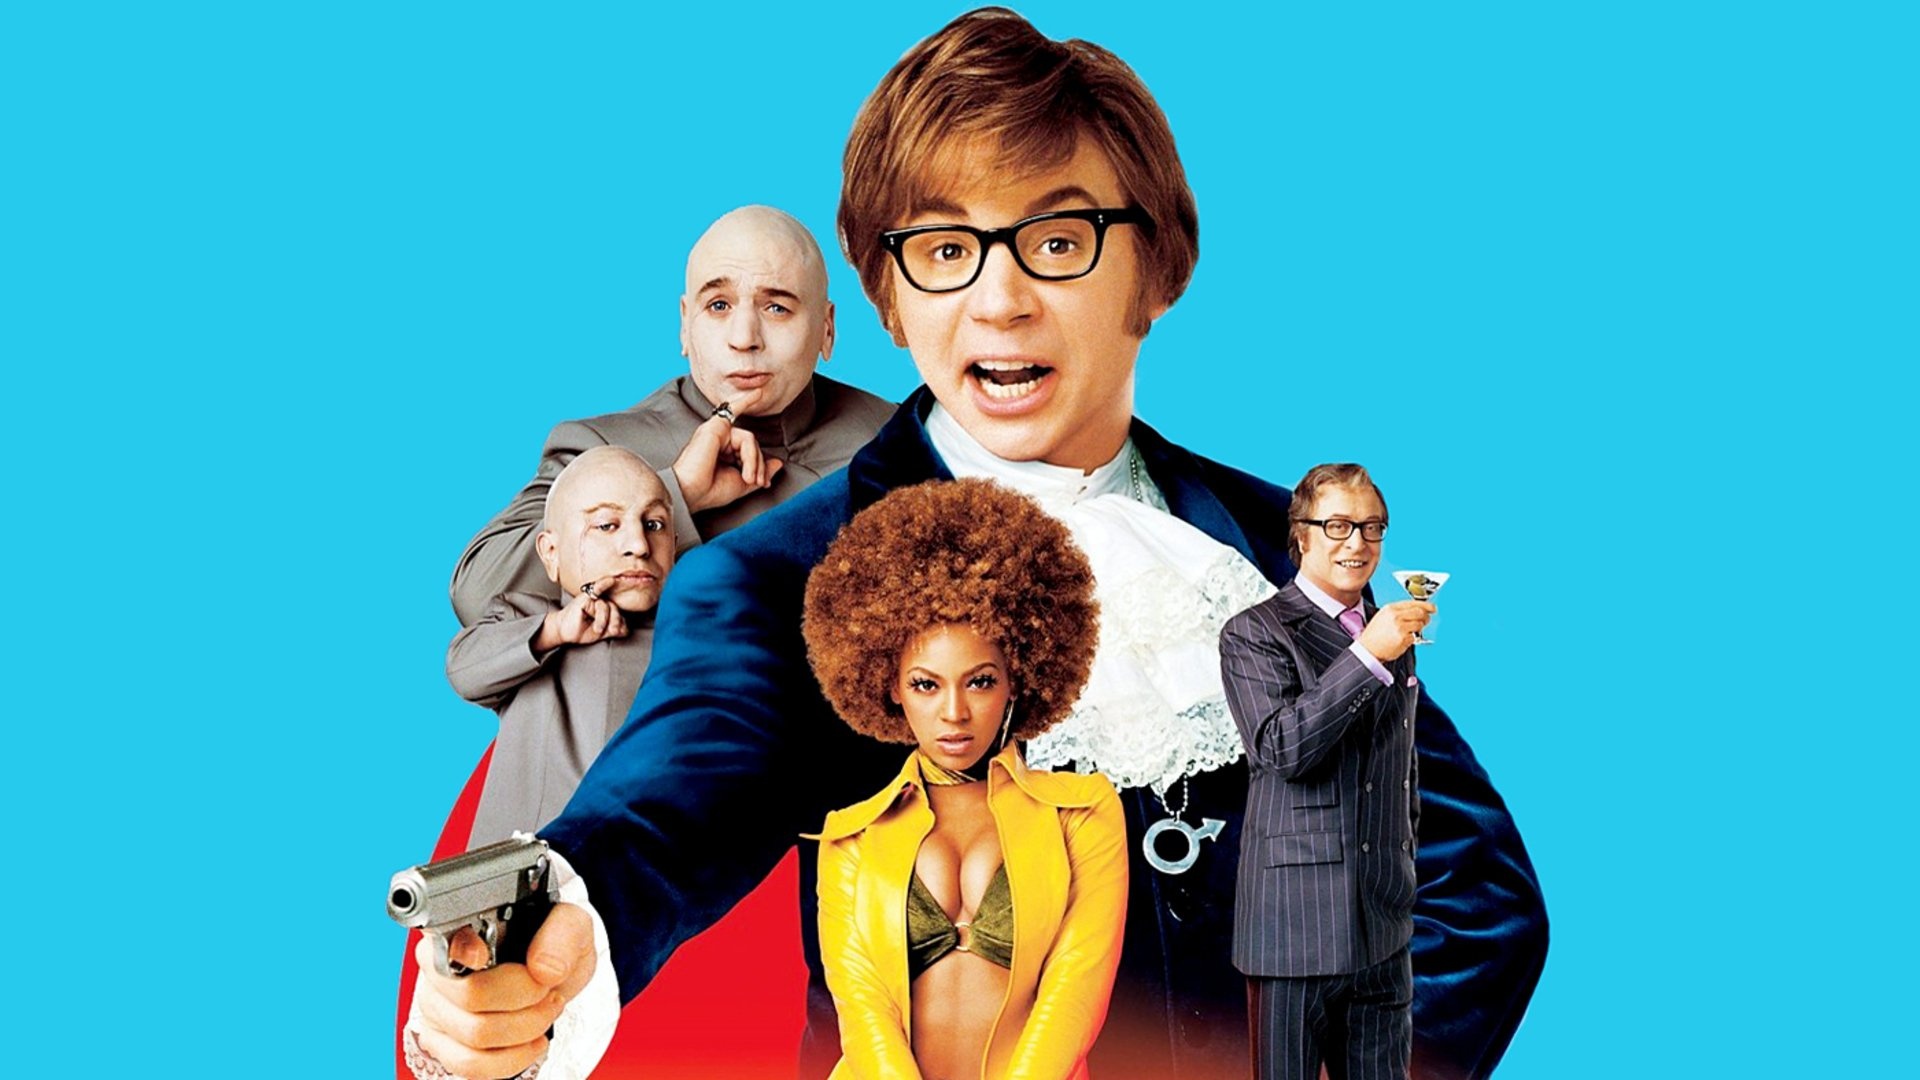 Austin Powers in Goldmember, HD wallpapers, Background images, 1920x1080 Full HD Desktop